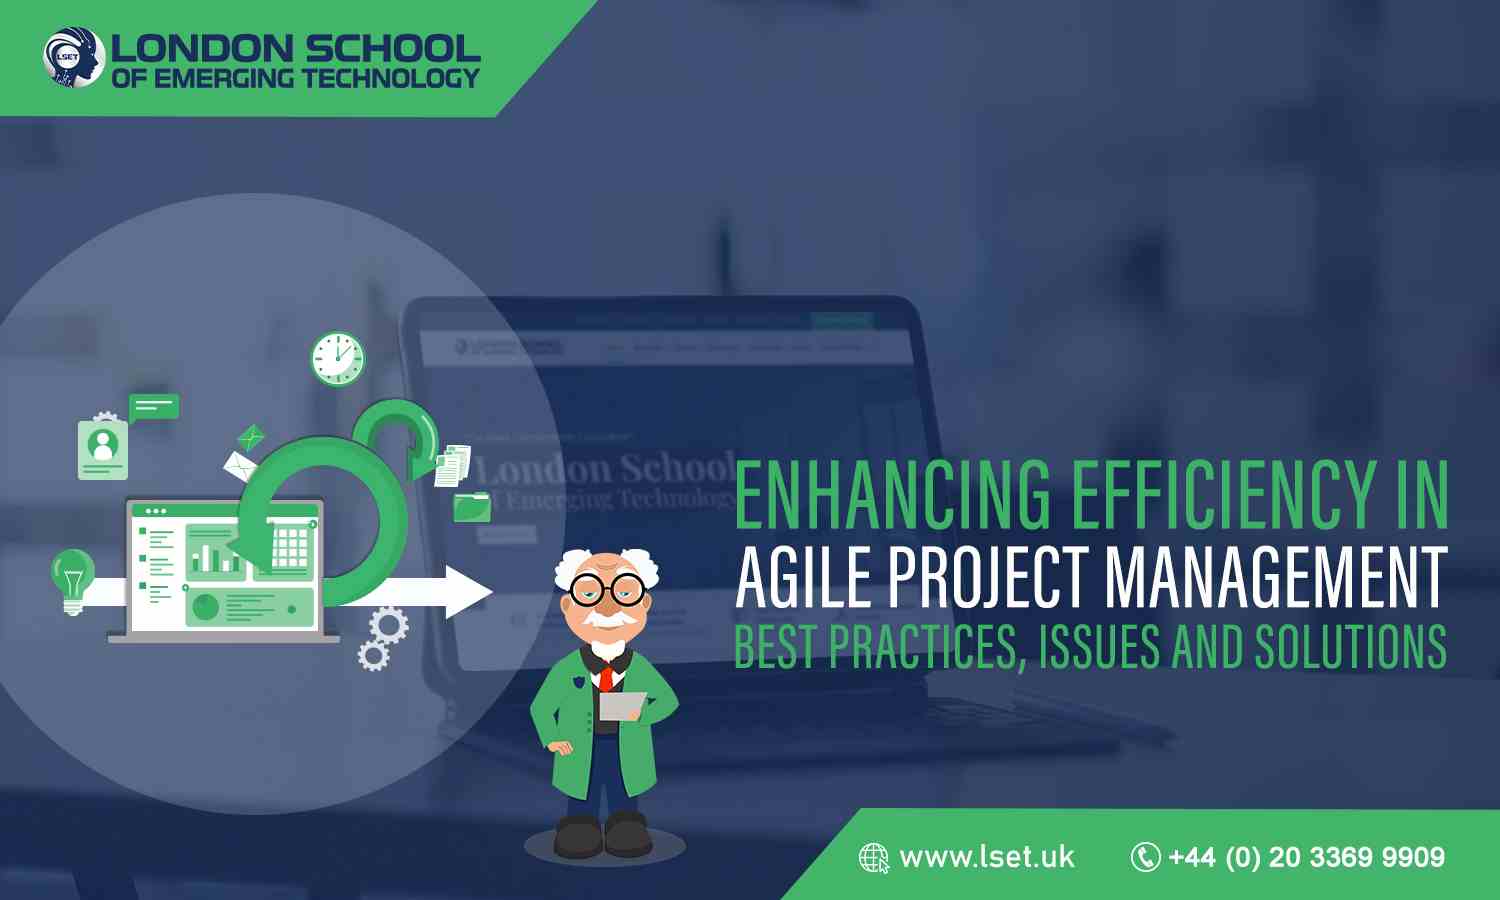 Enhancing Efficiency in Agile Project Management Best Practices, Issues and Solutions